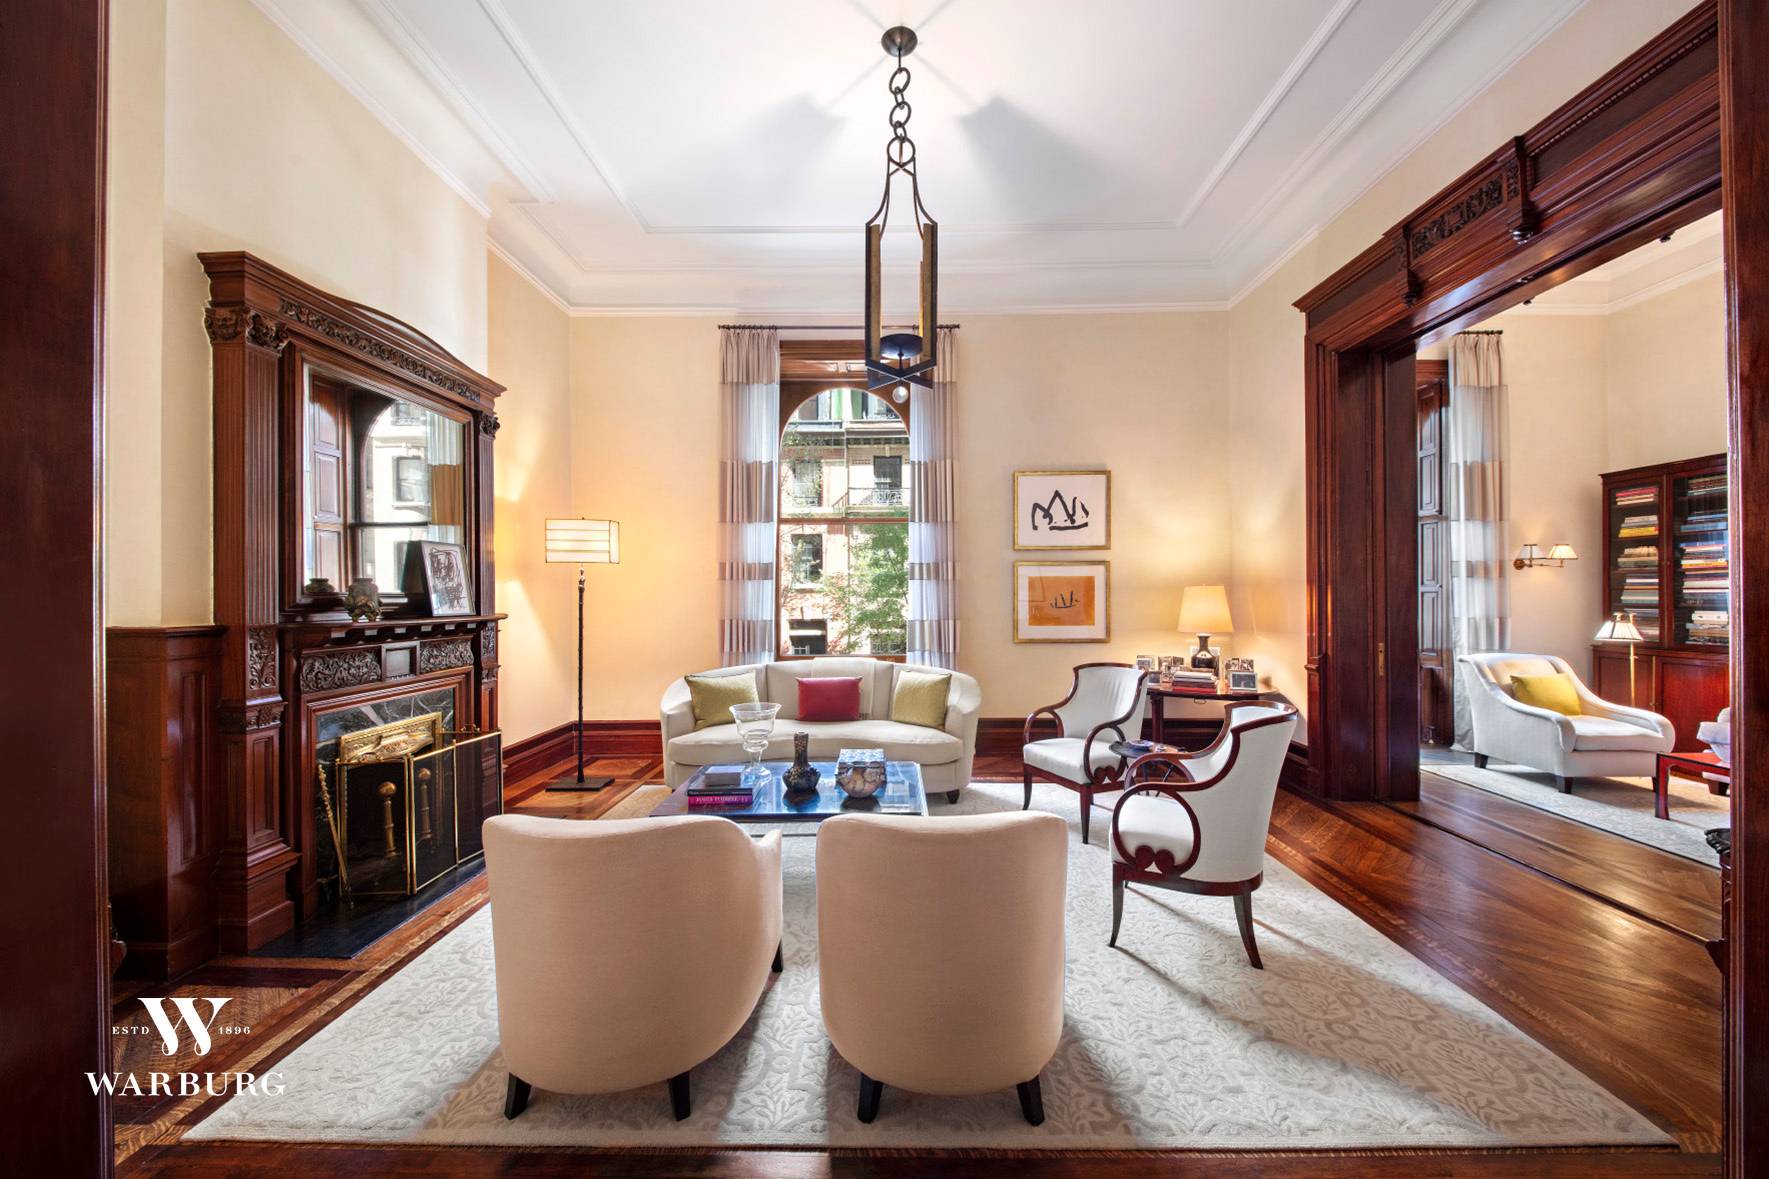 An apartment that can be best described as a work of art has come to market in the famed Dakota.